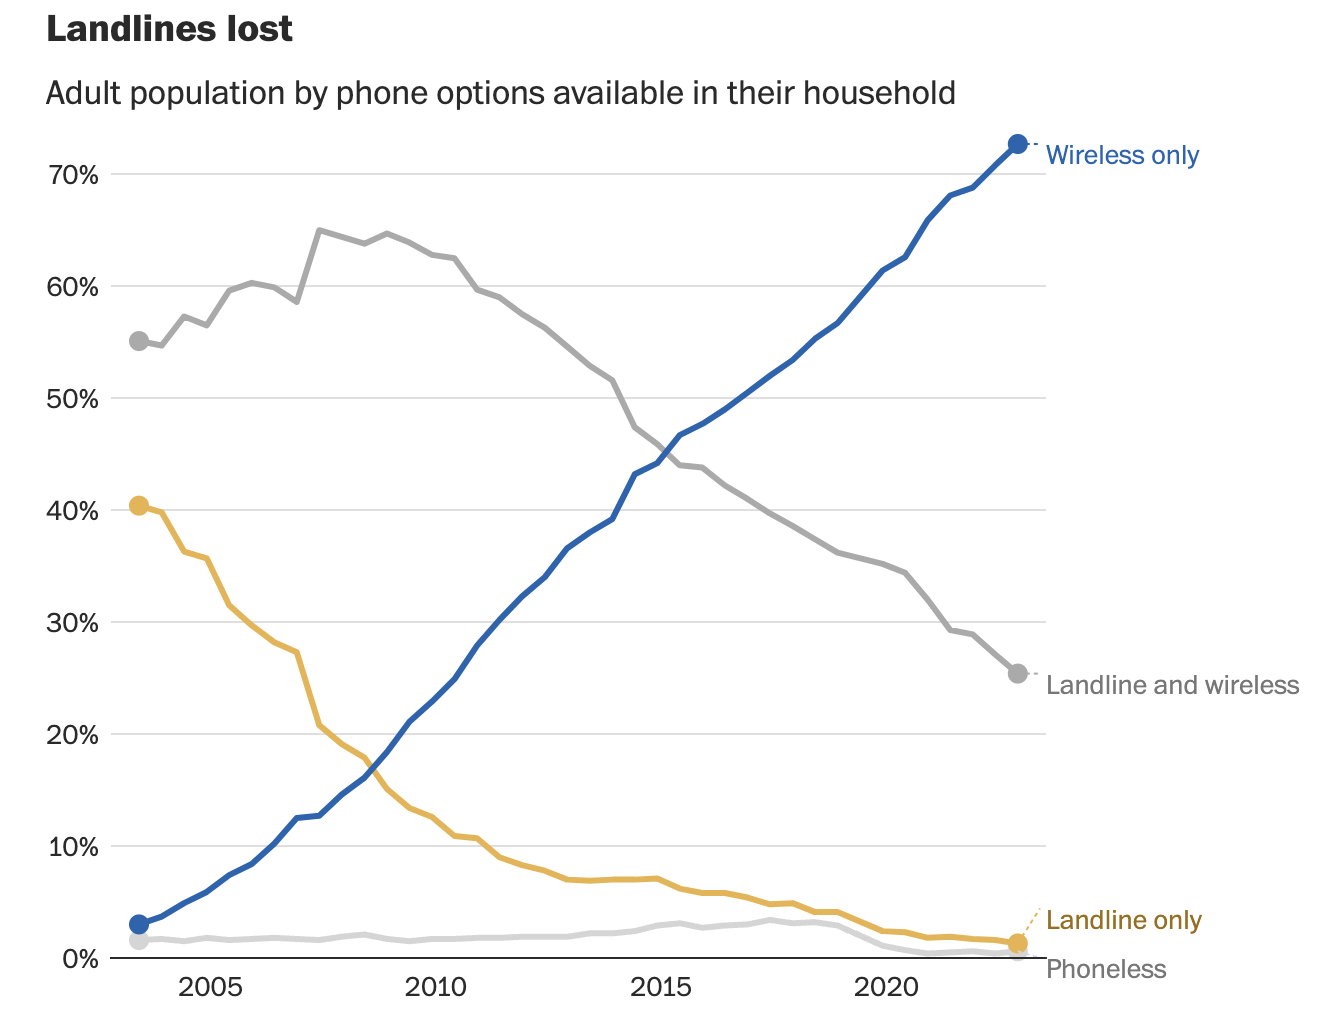 Graph showing landlines lost from 2005 to 2020